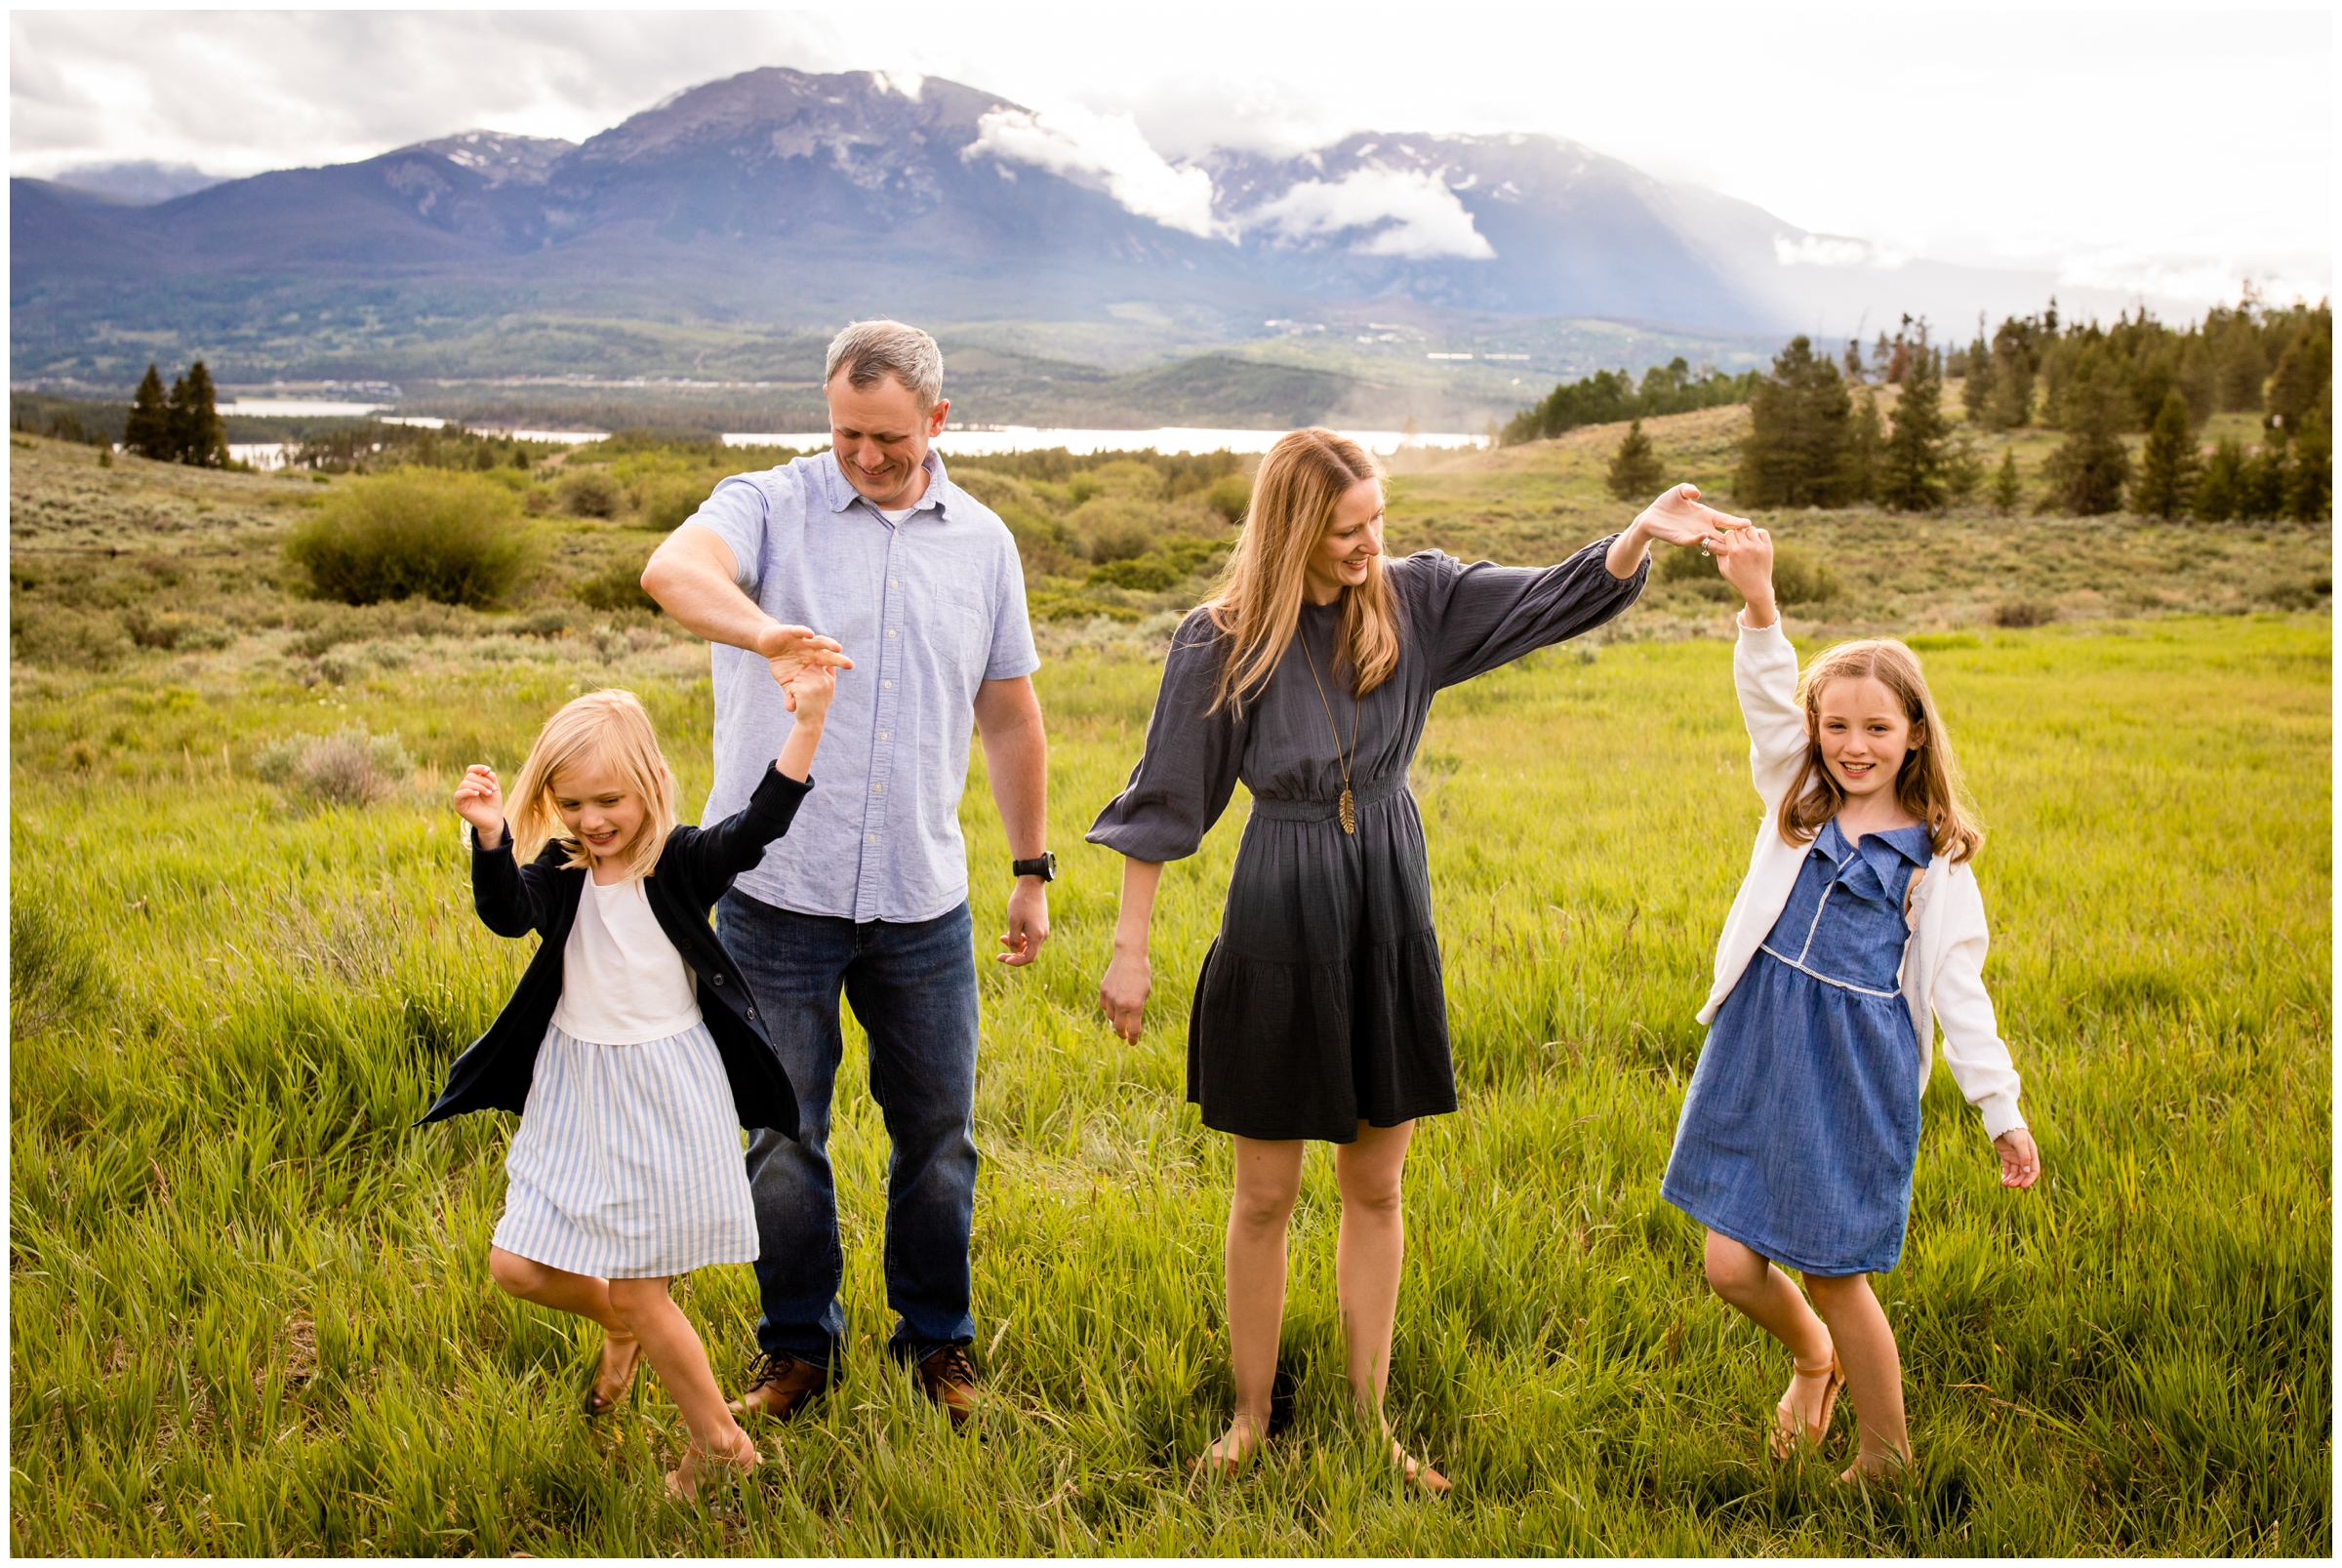 sweet candid family photos in a field in the Colorado mountains by Plum Pretty Photography 